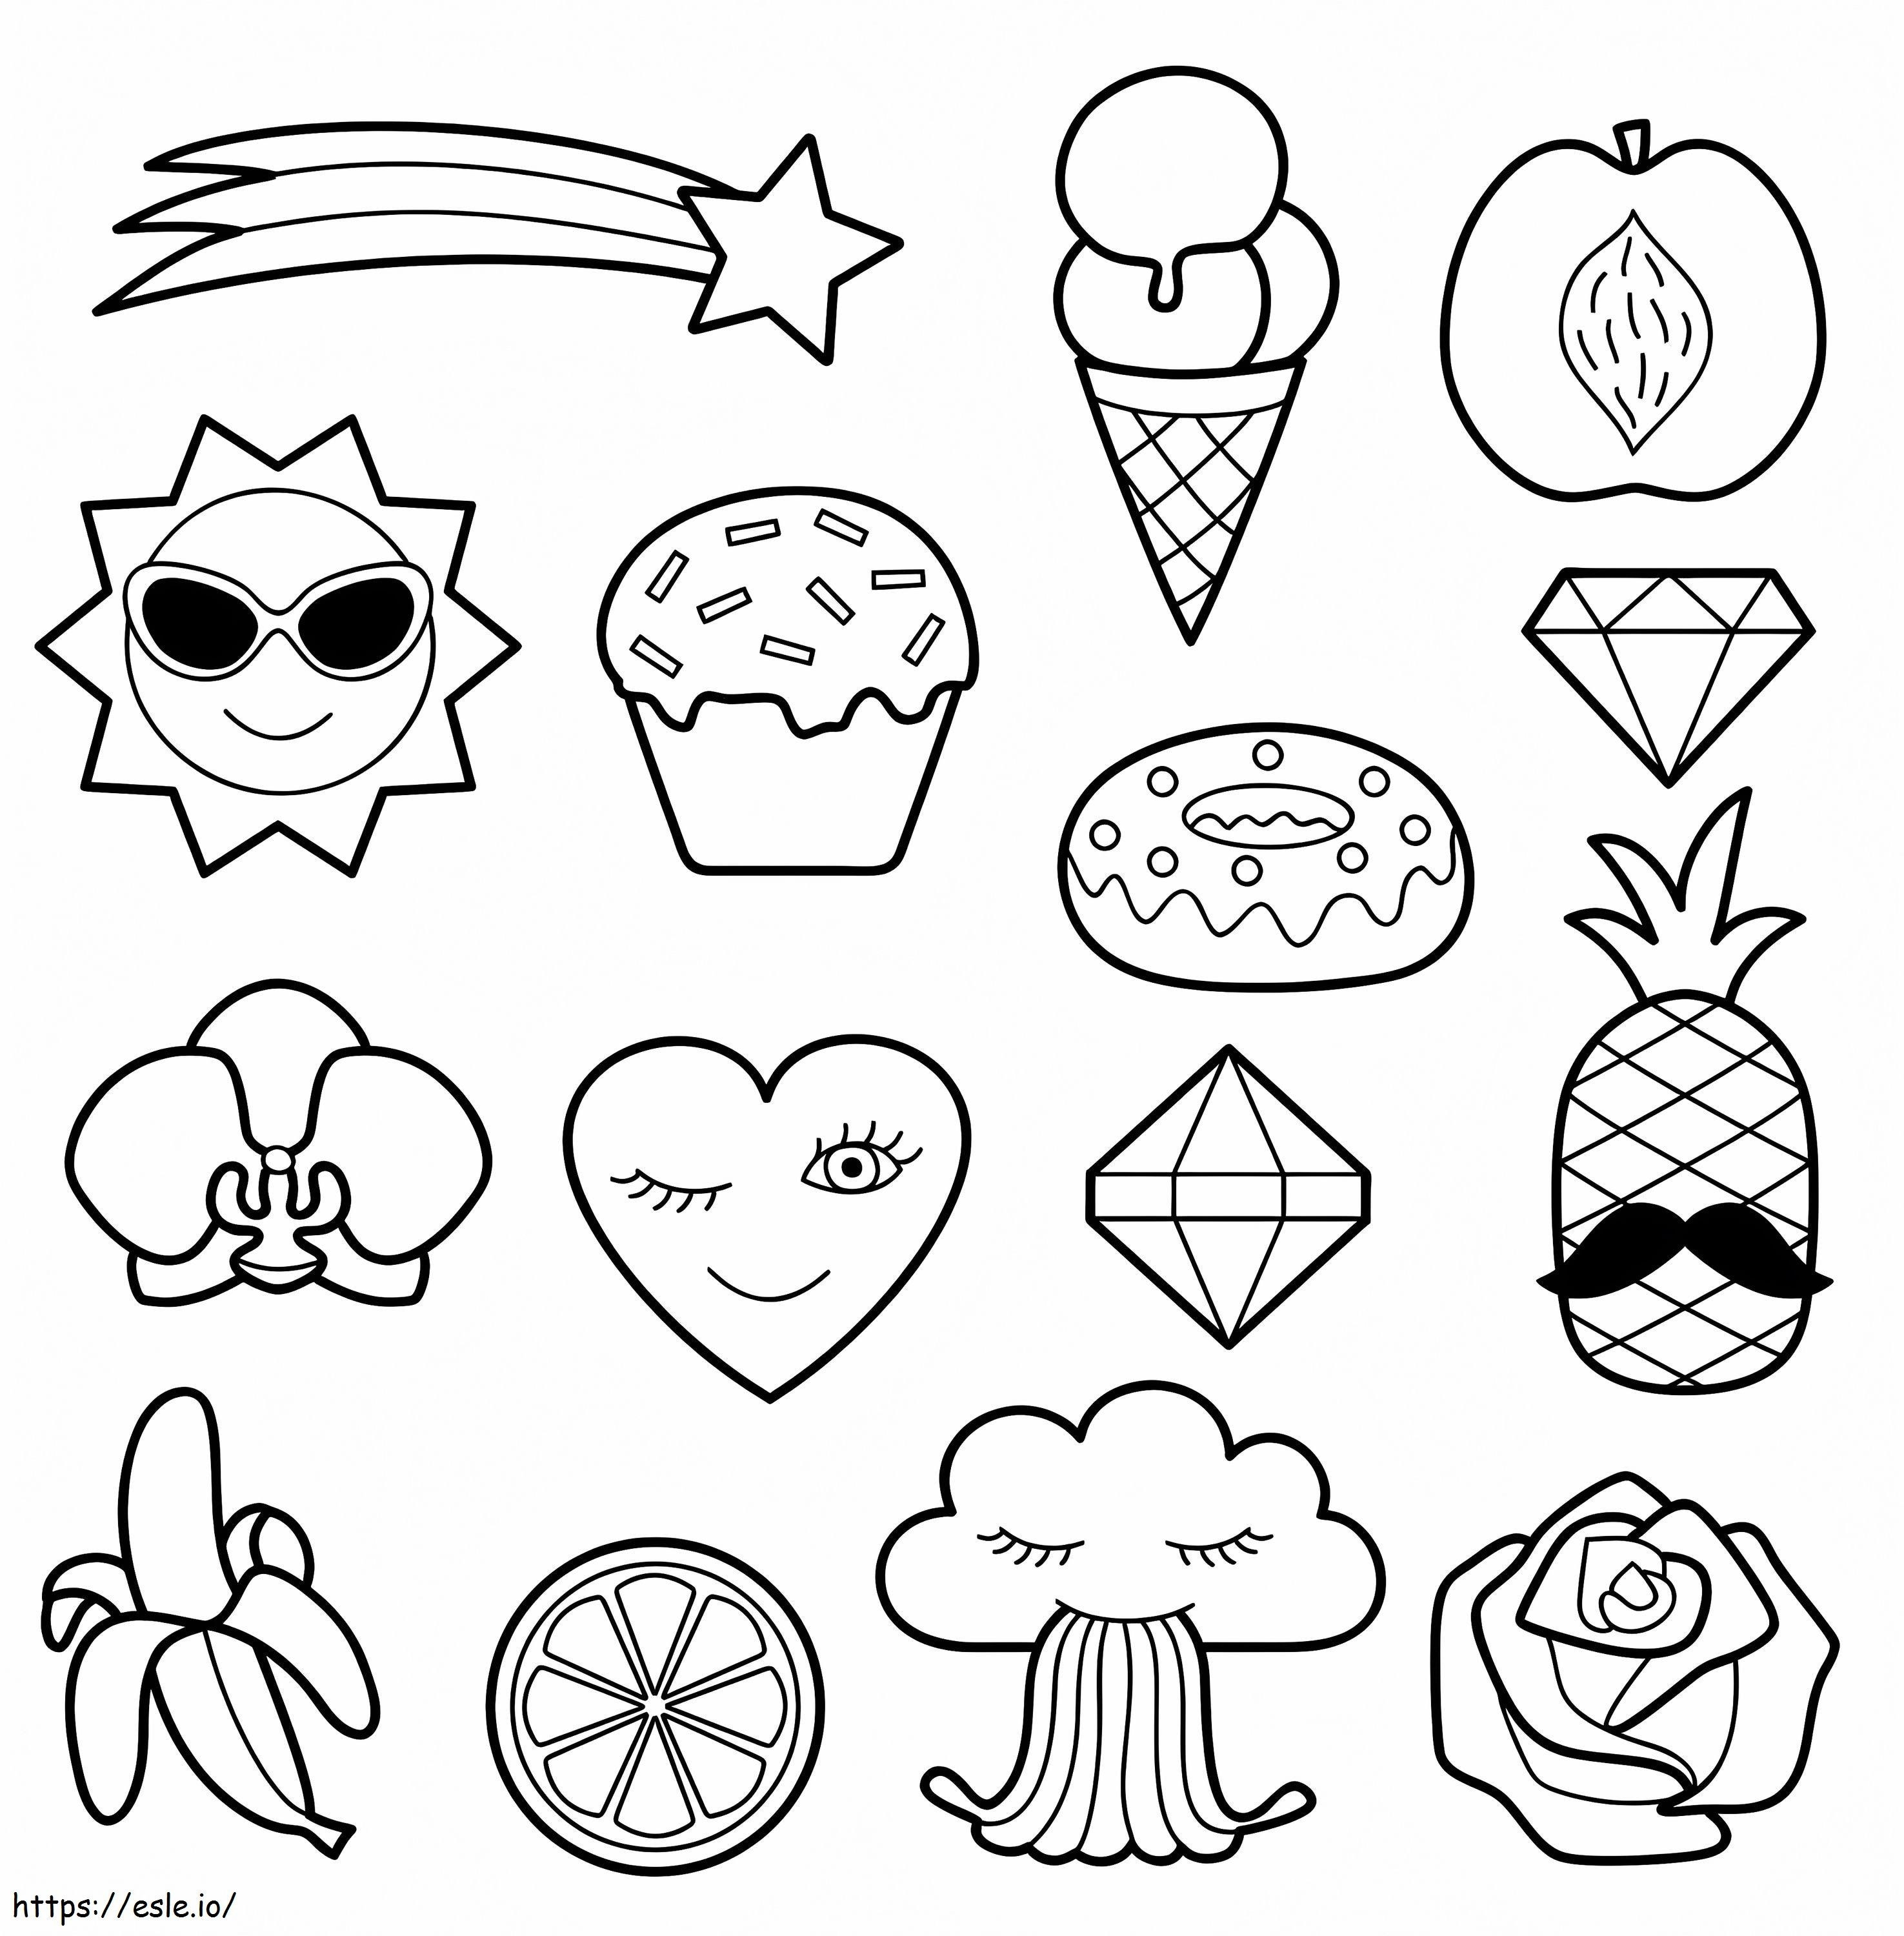 Cool Stickers coloring page